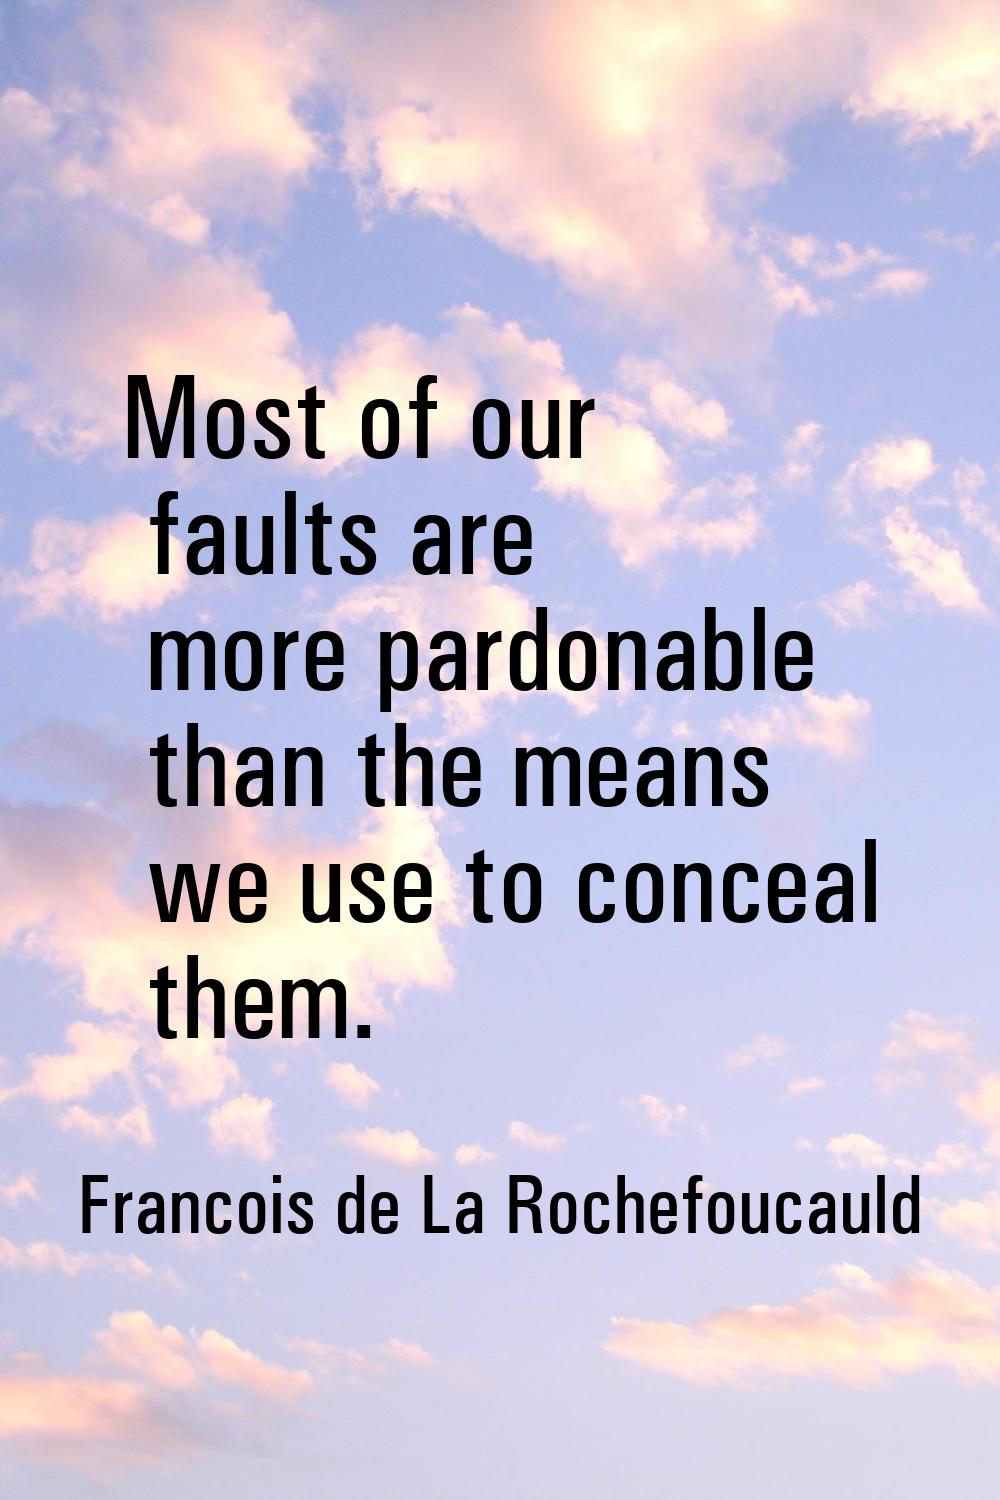 Most of our faults are more pardonable than the means we use to conceal them.